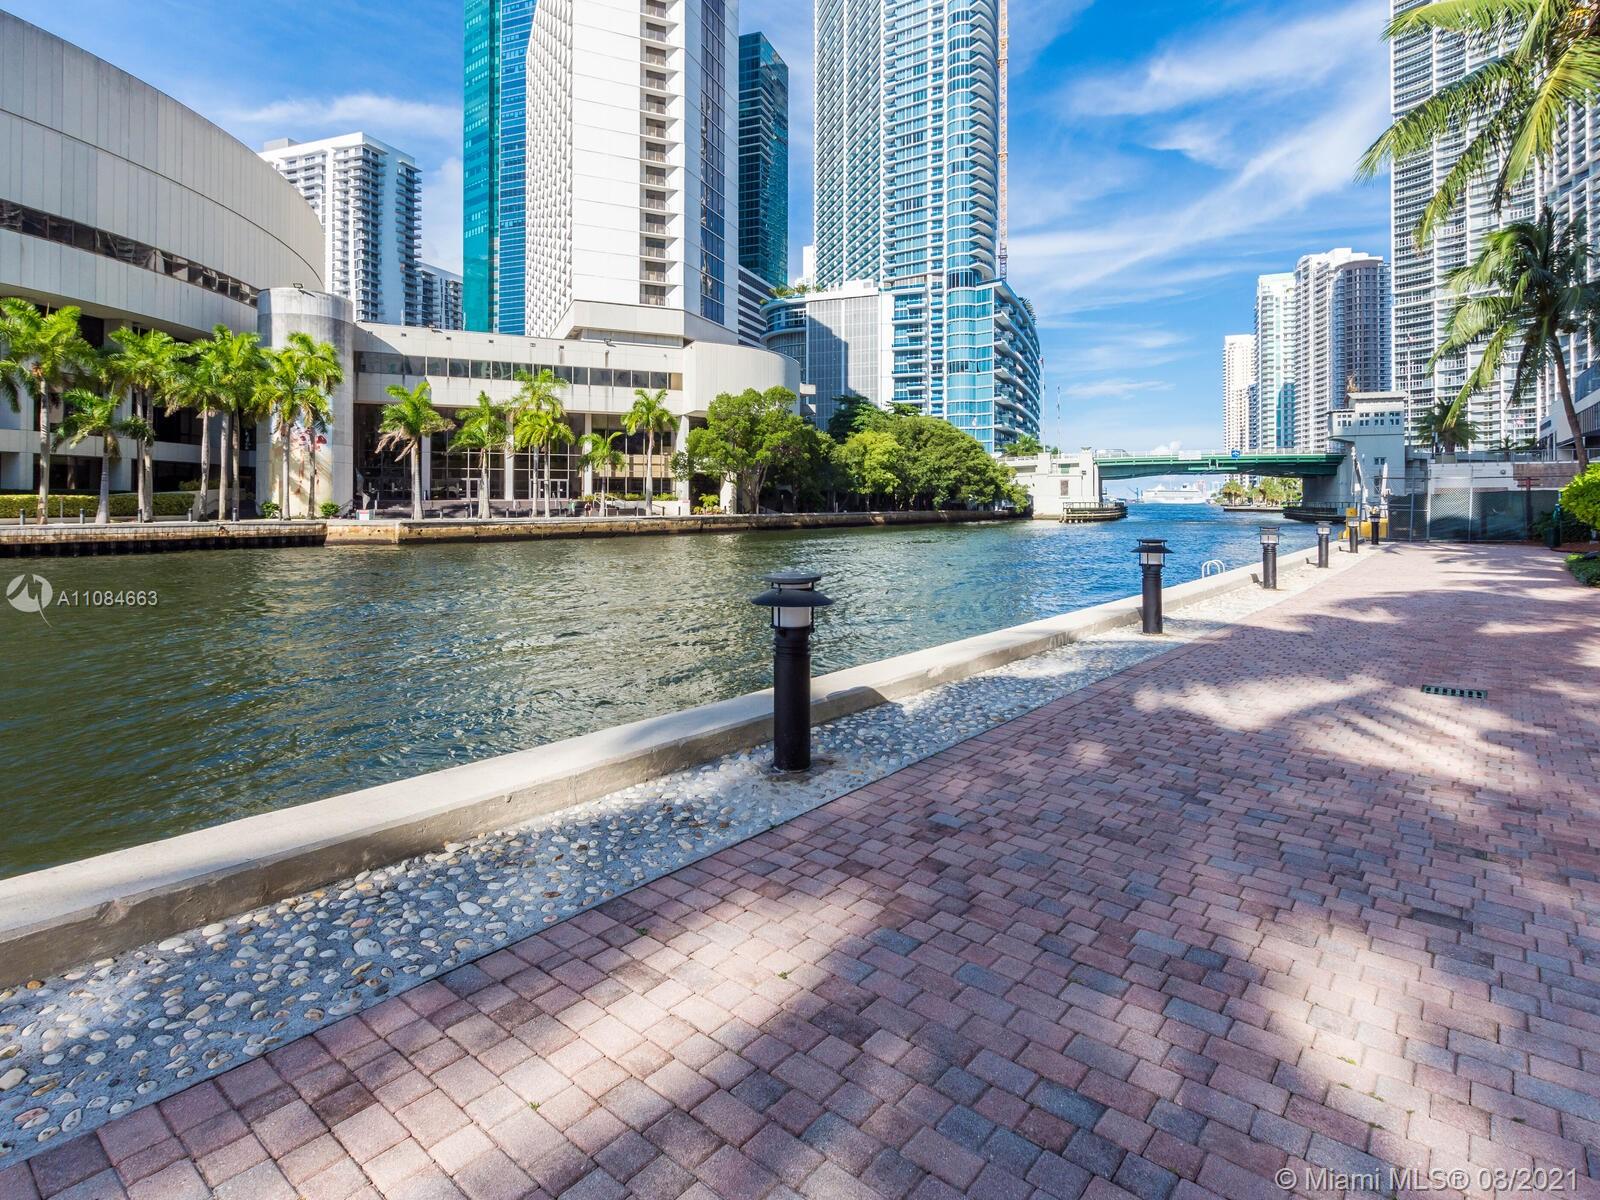 Brickell on the River South image #71